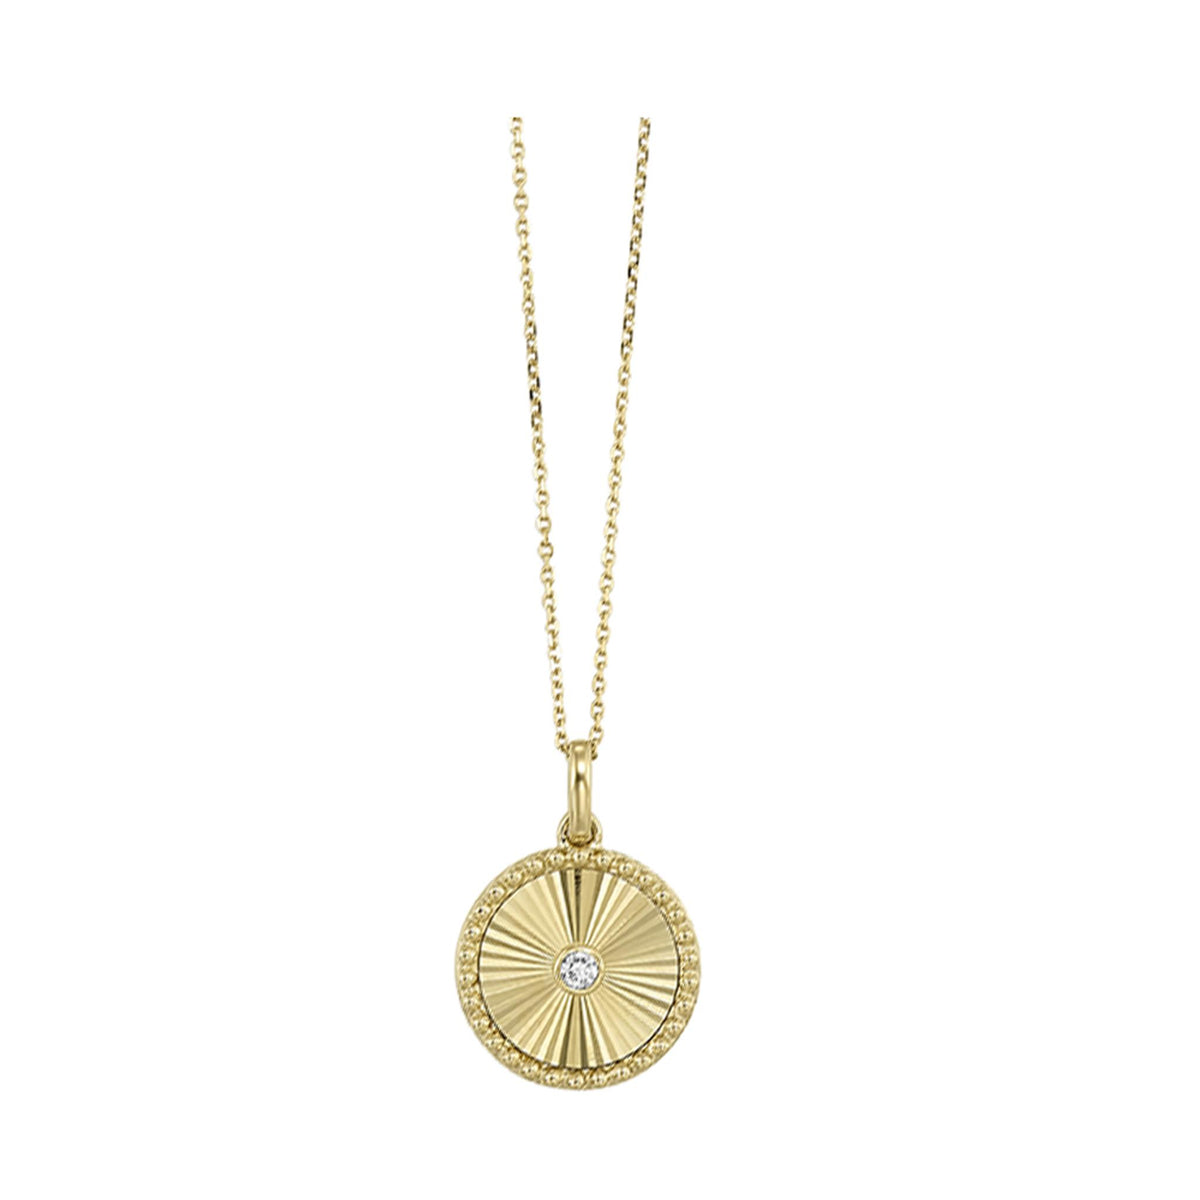 10K Yellow Gold Sunburst Disc Pendant with .05 Diamond on 18" Cable Chain